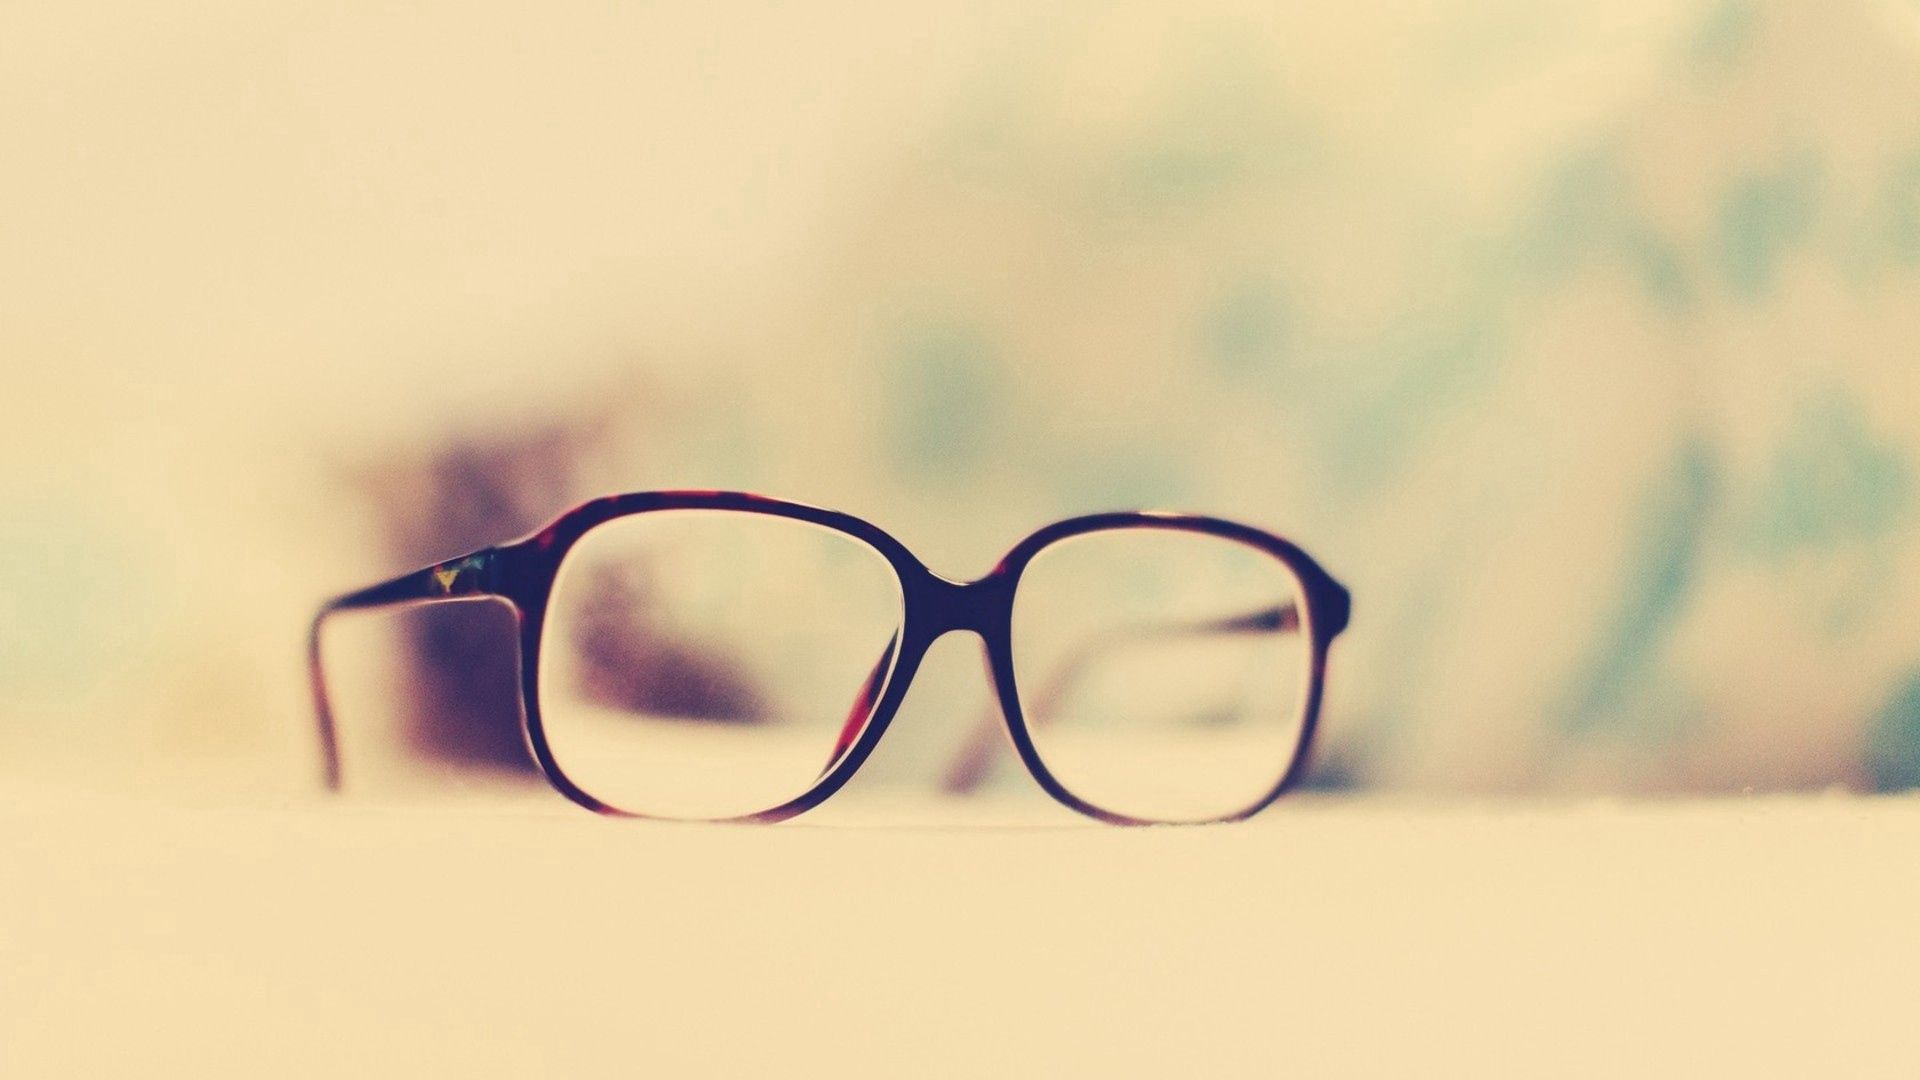 miscellanea, miscellaneous, form, lenses, glasses, spectacles, diopter iphone wallpaper